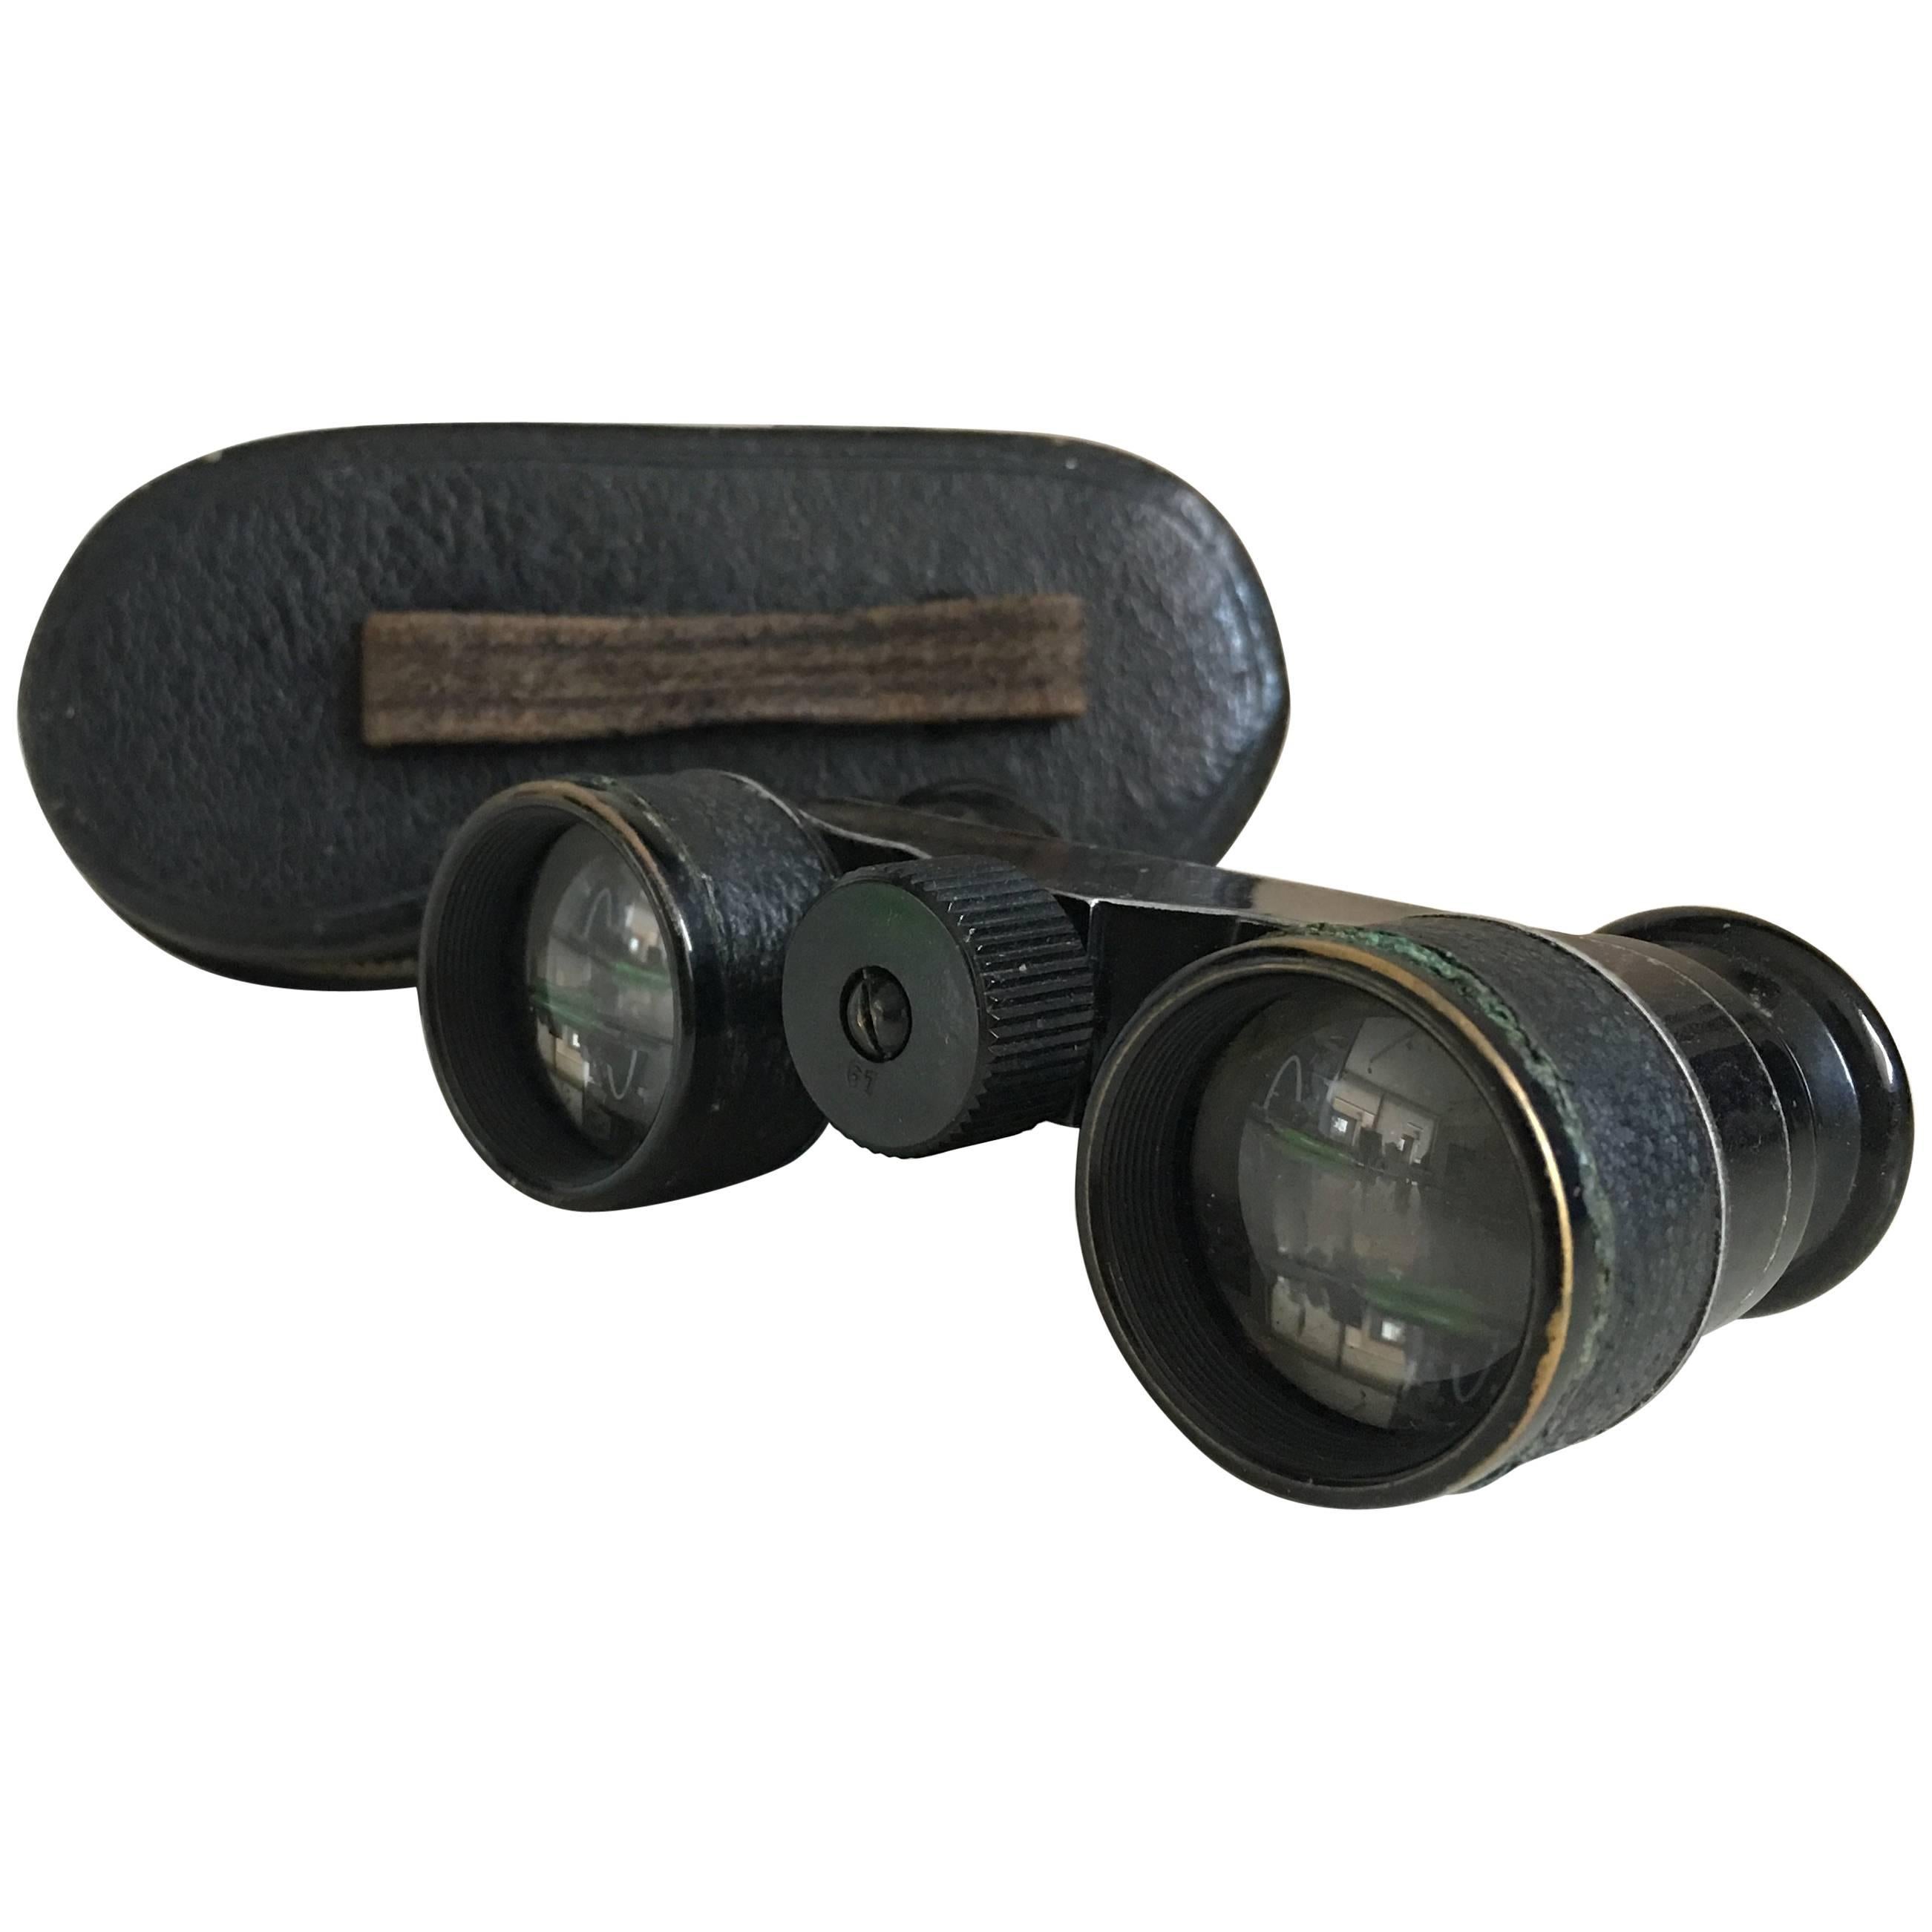 Binoculars Opera Glasses with Leather Case For Sale